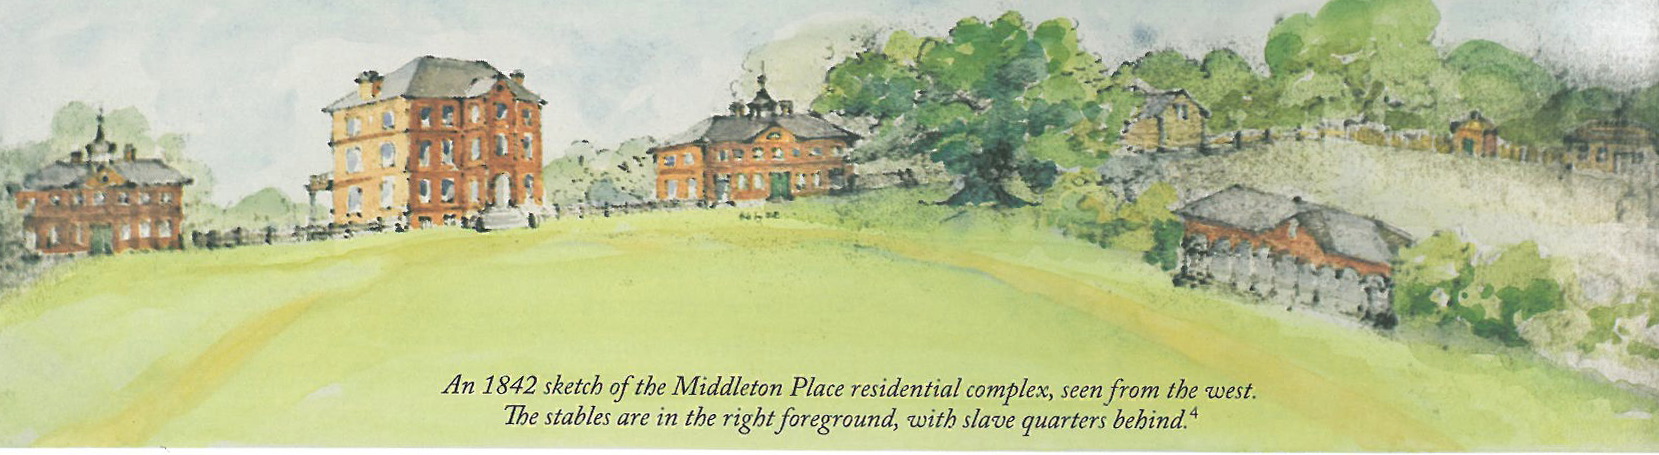 The complex of buildings at Middleton Place, as of 1842. Image courtesy of the Middleton Place Foundation.